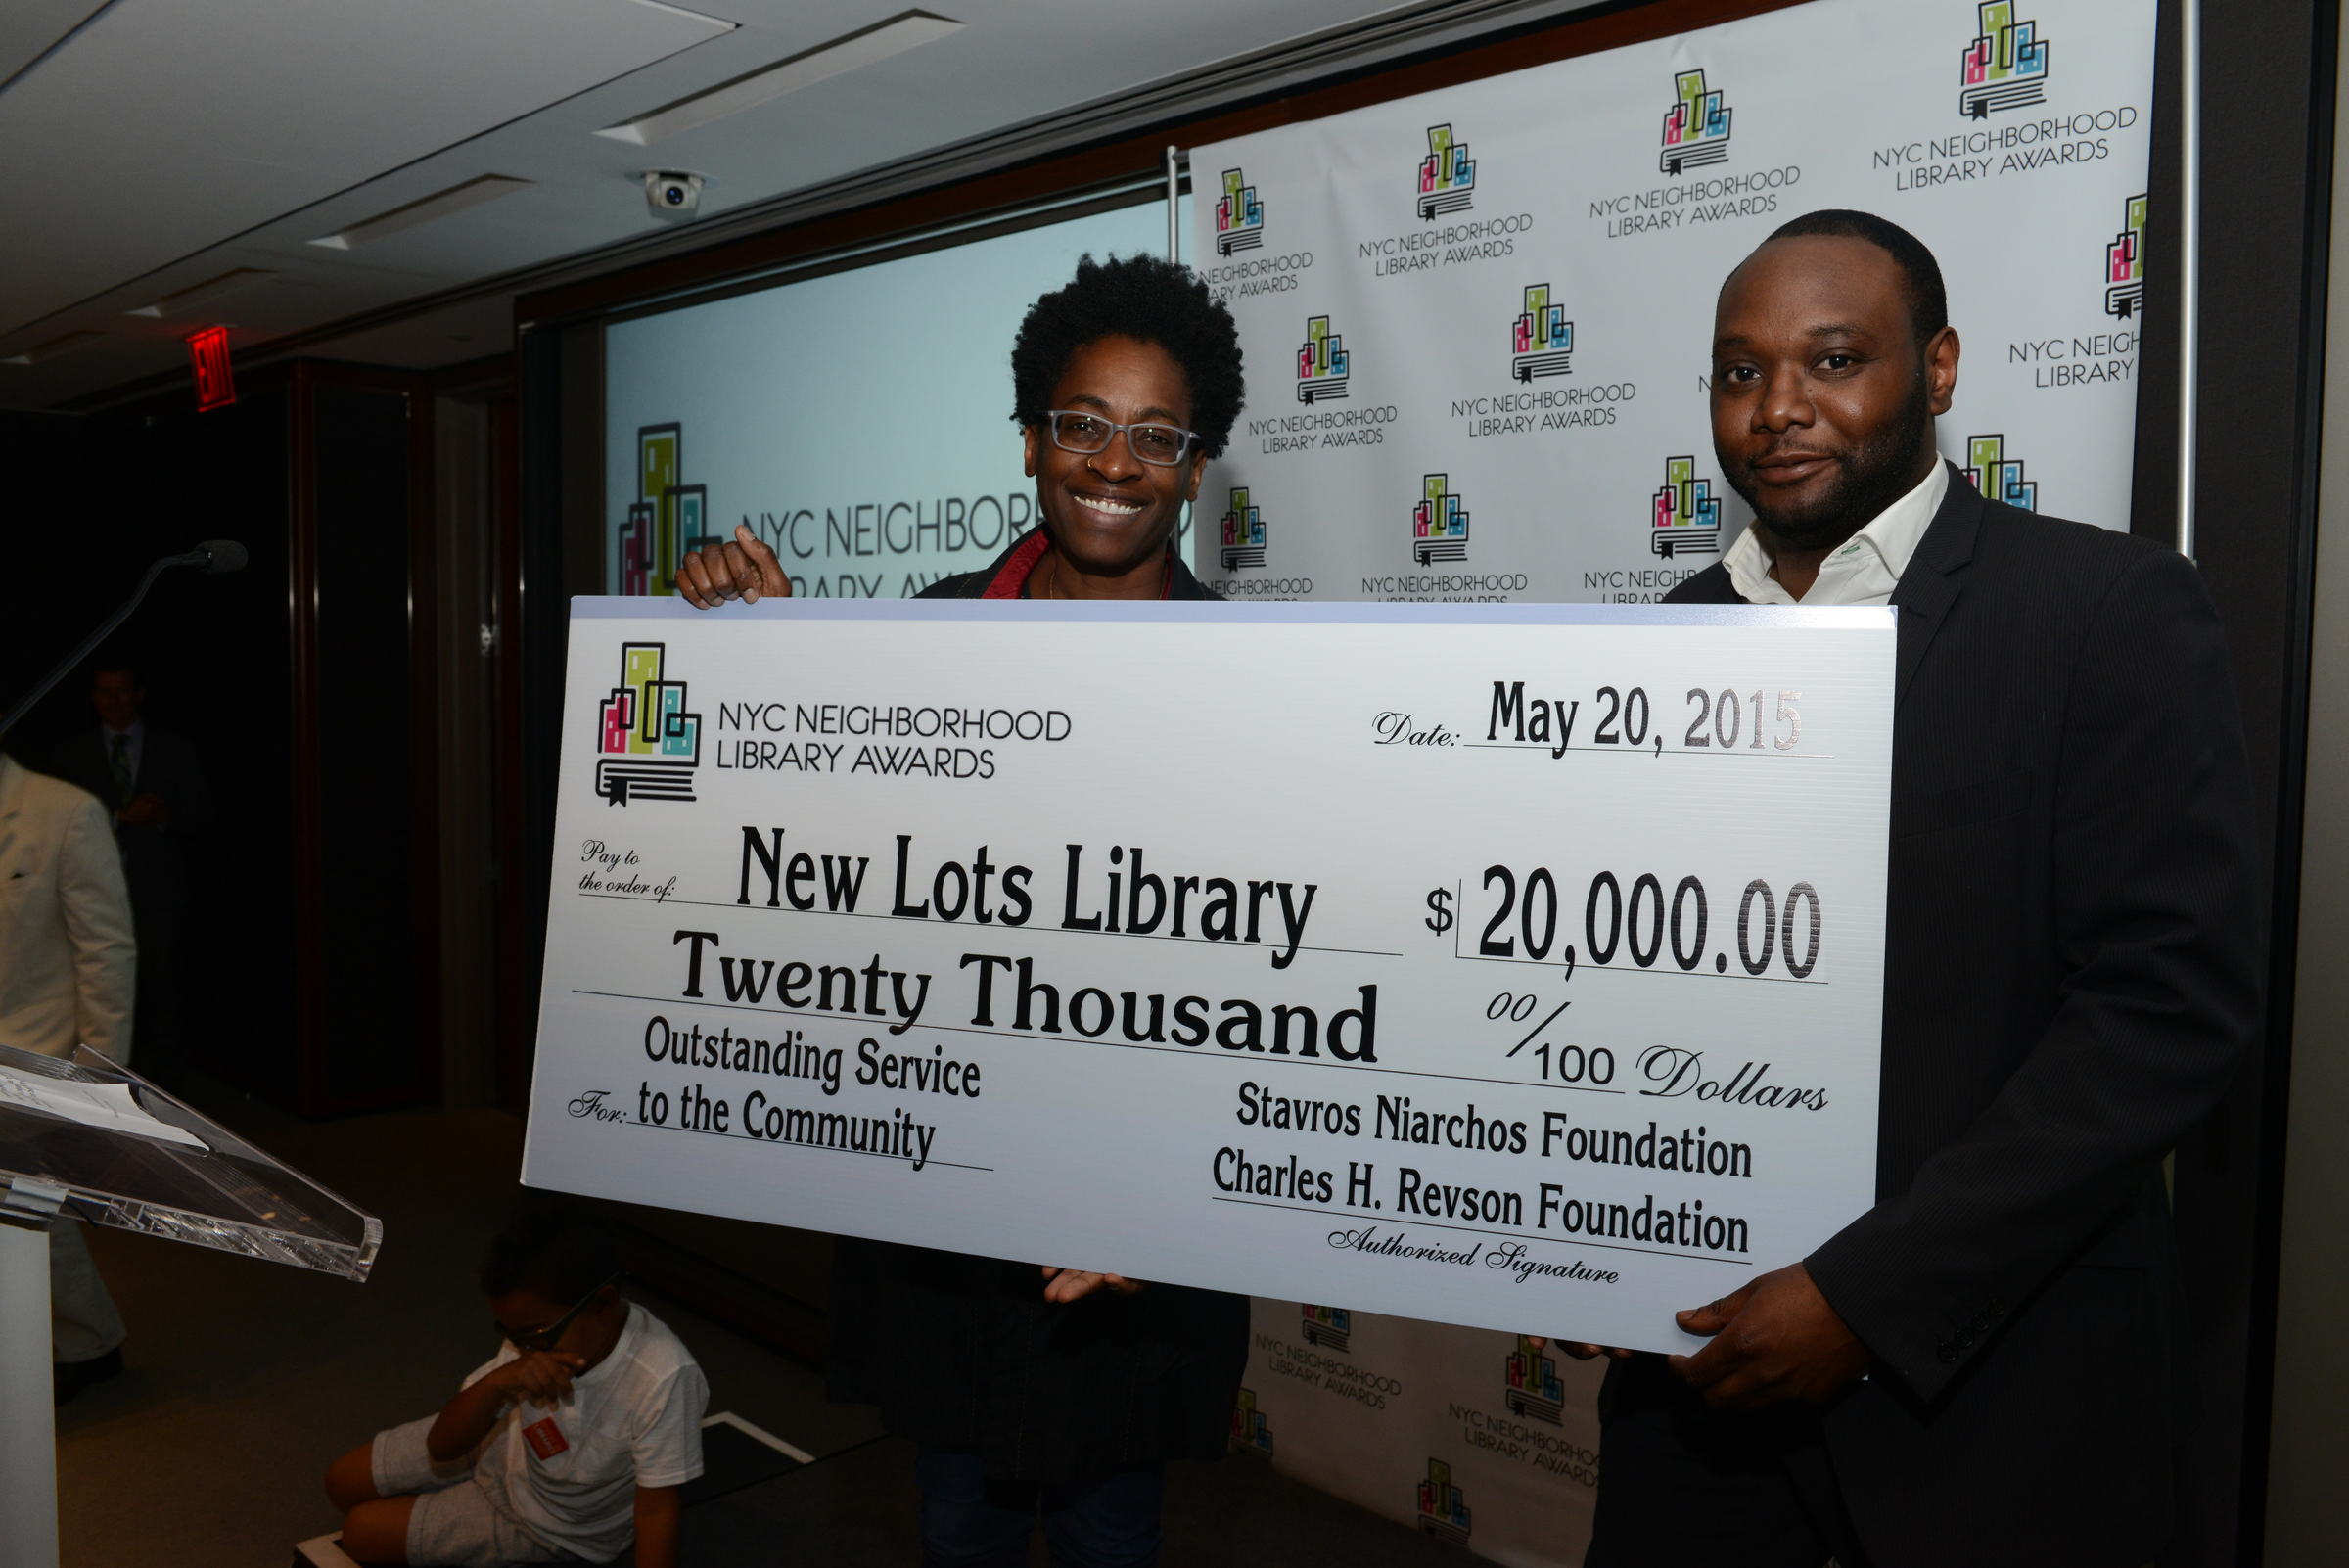 L to R: Library Awards Judge Jacqueline Woodson and New Lots Library Manager Edwin Maxwell